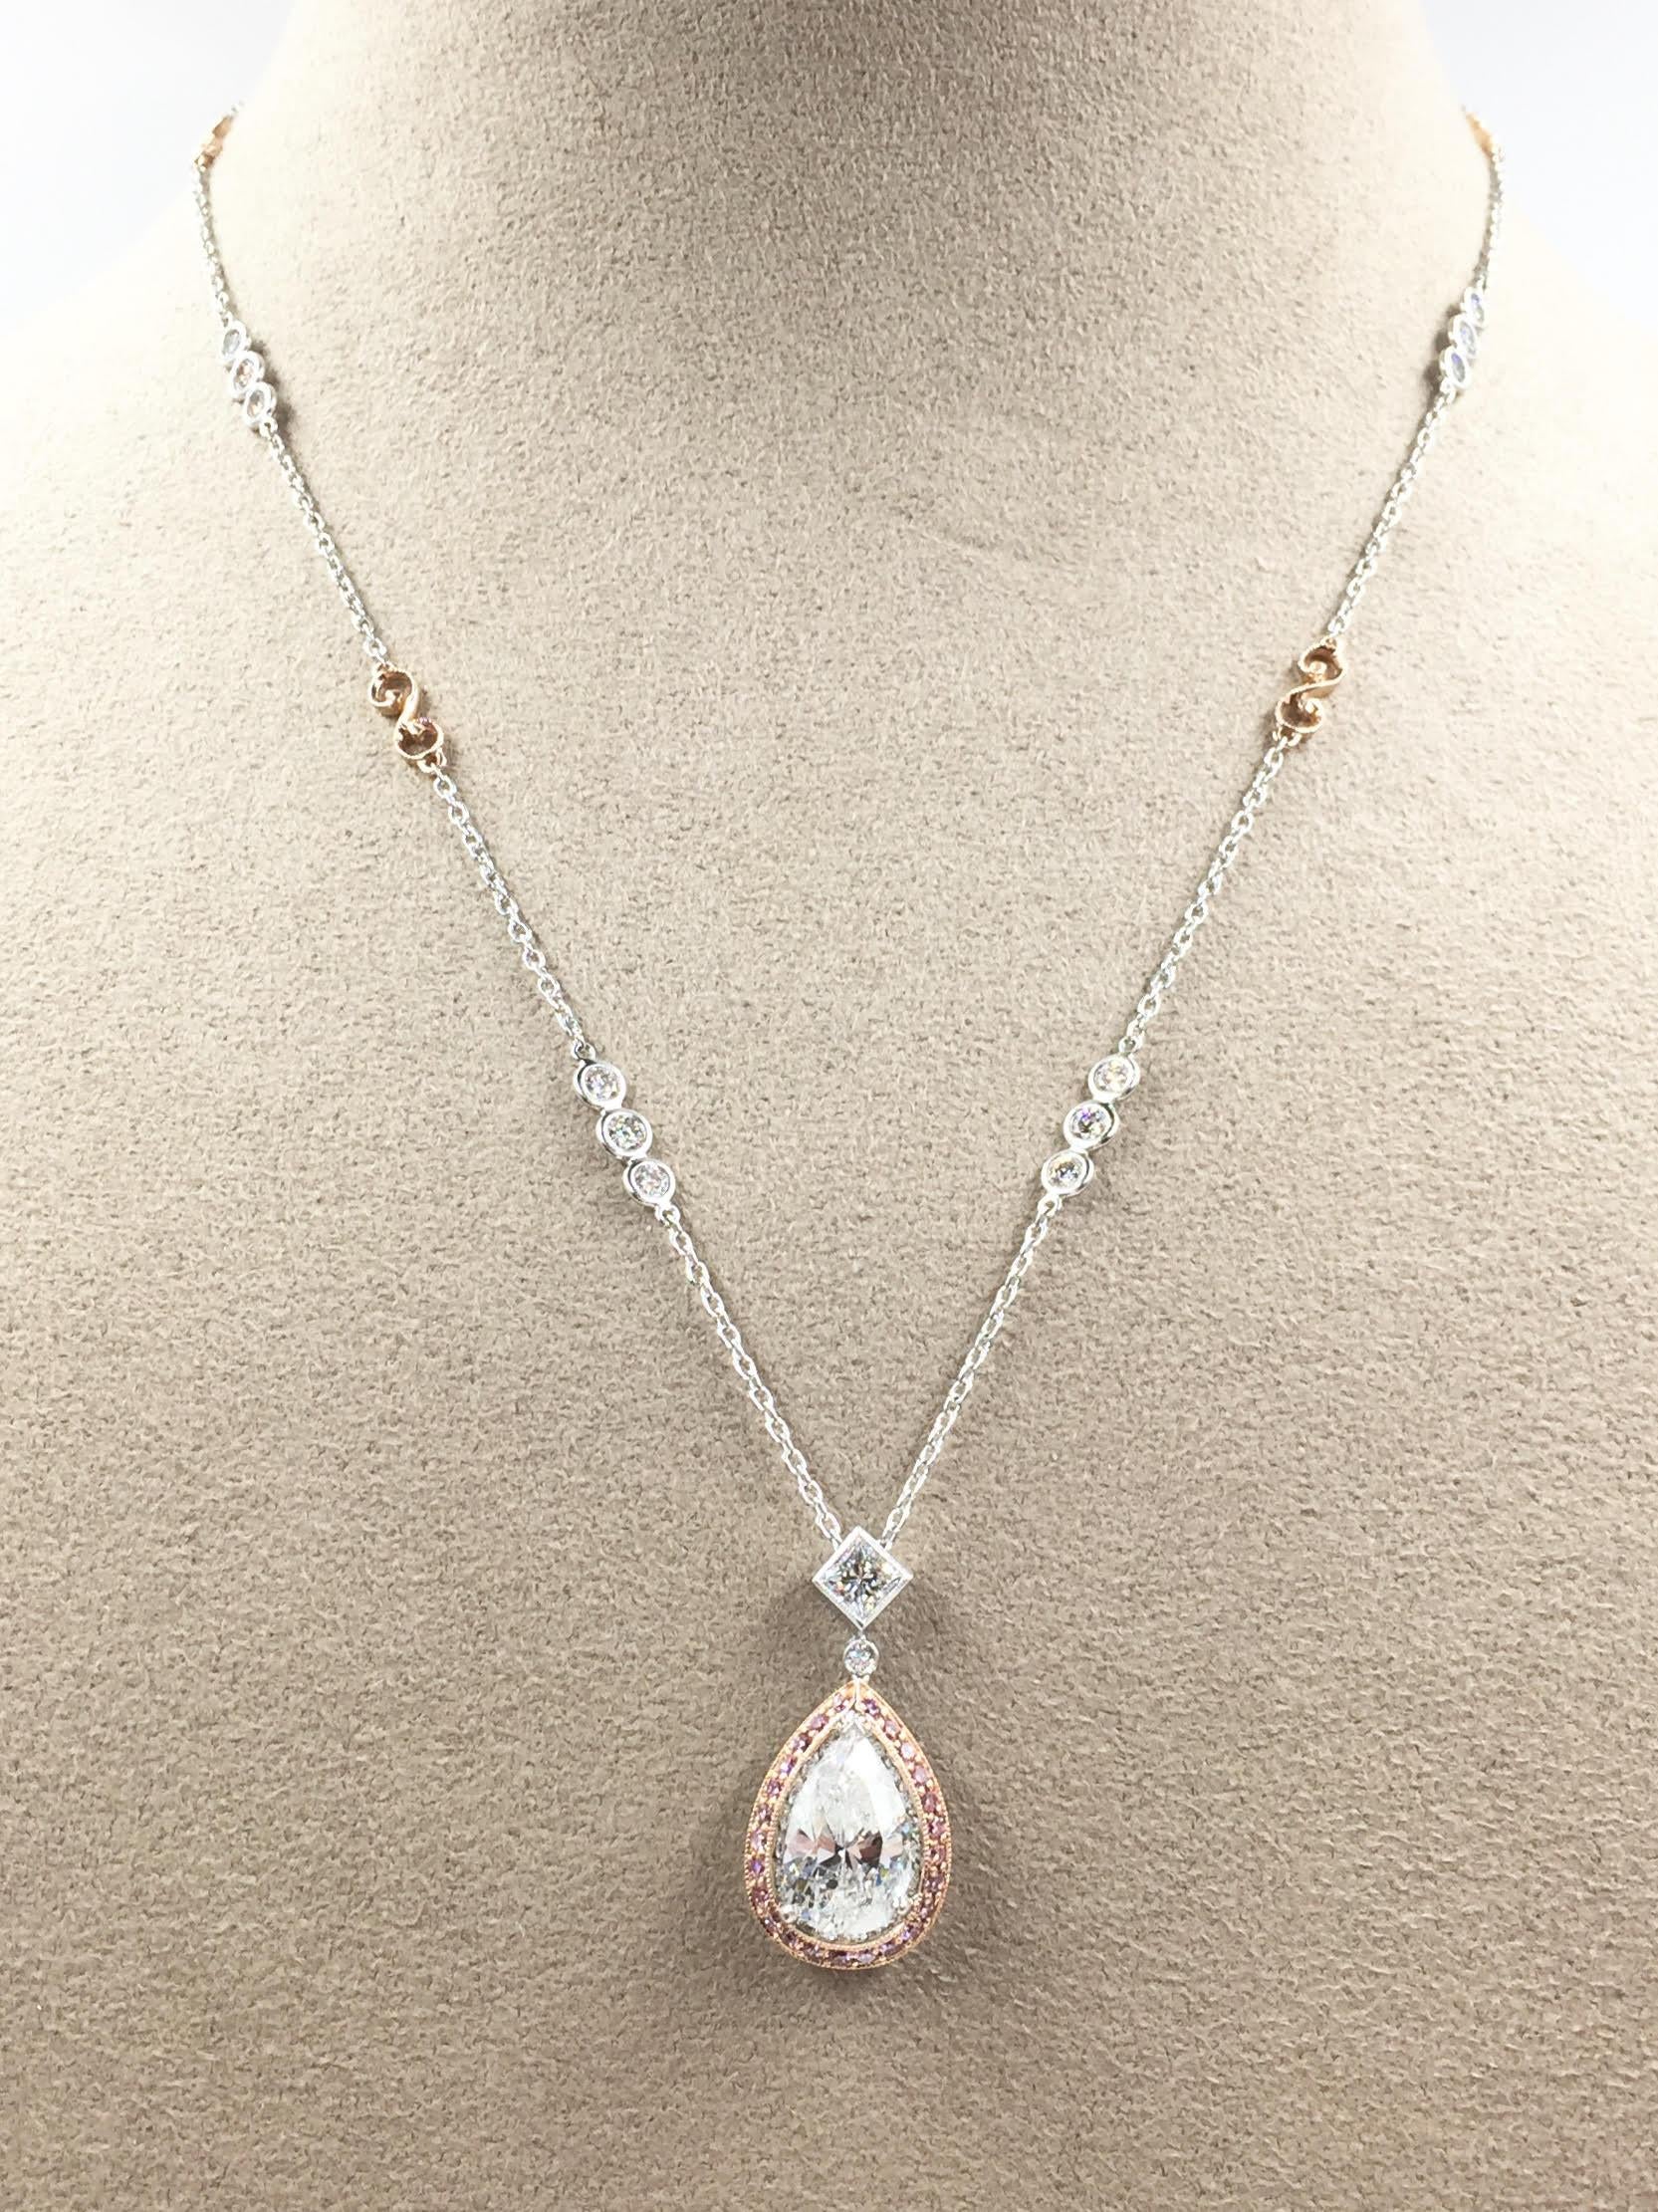 Masterly handcrafted in platinum (PT 900) and 18k rose gold with incredible detail by high jewelry and engagement ring designer, Jack Kelege. A 3.01 carat pear shape diamond rests in a beautiful antique design box surrounded by .40 carats of fancy